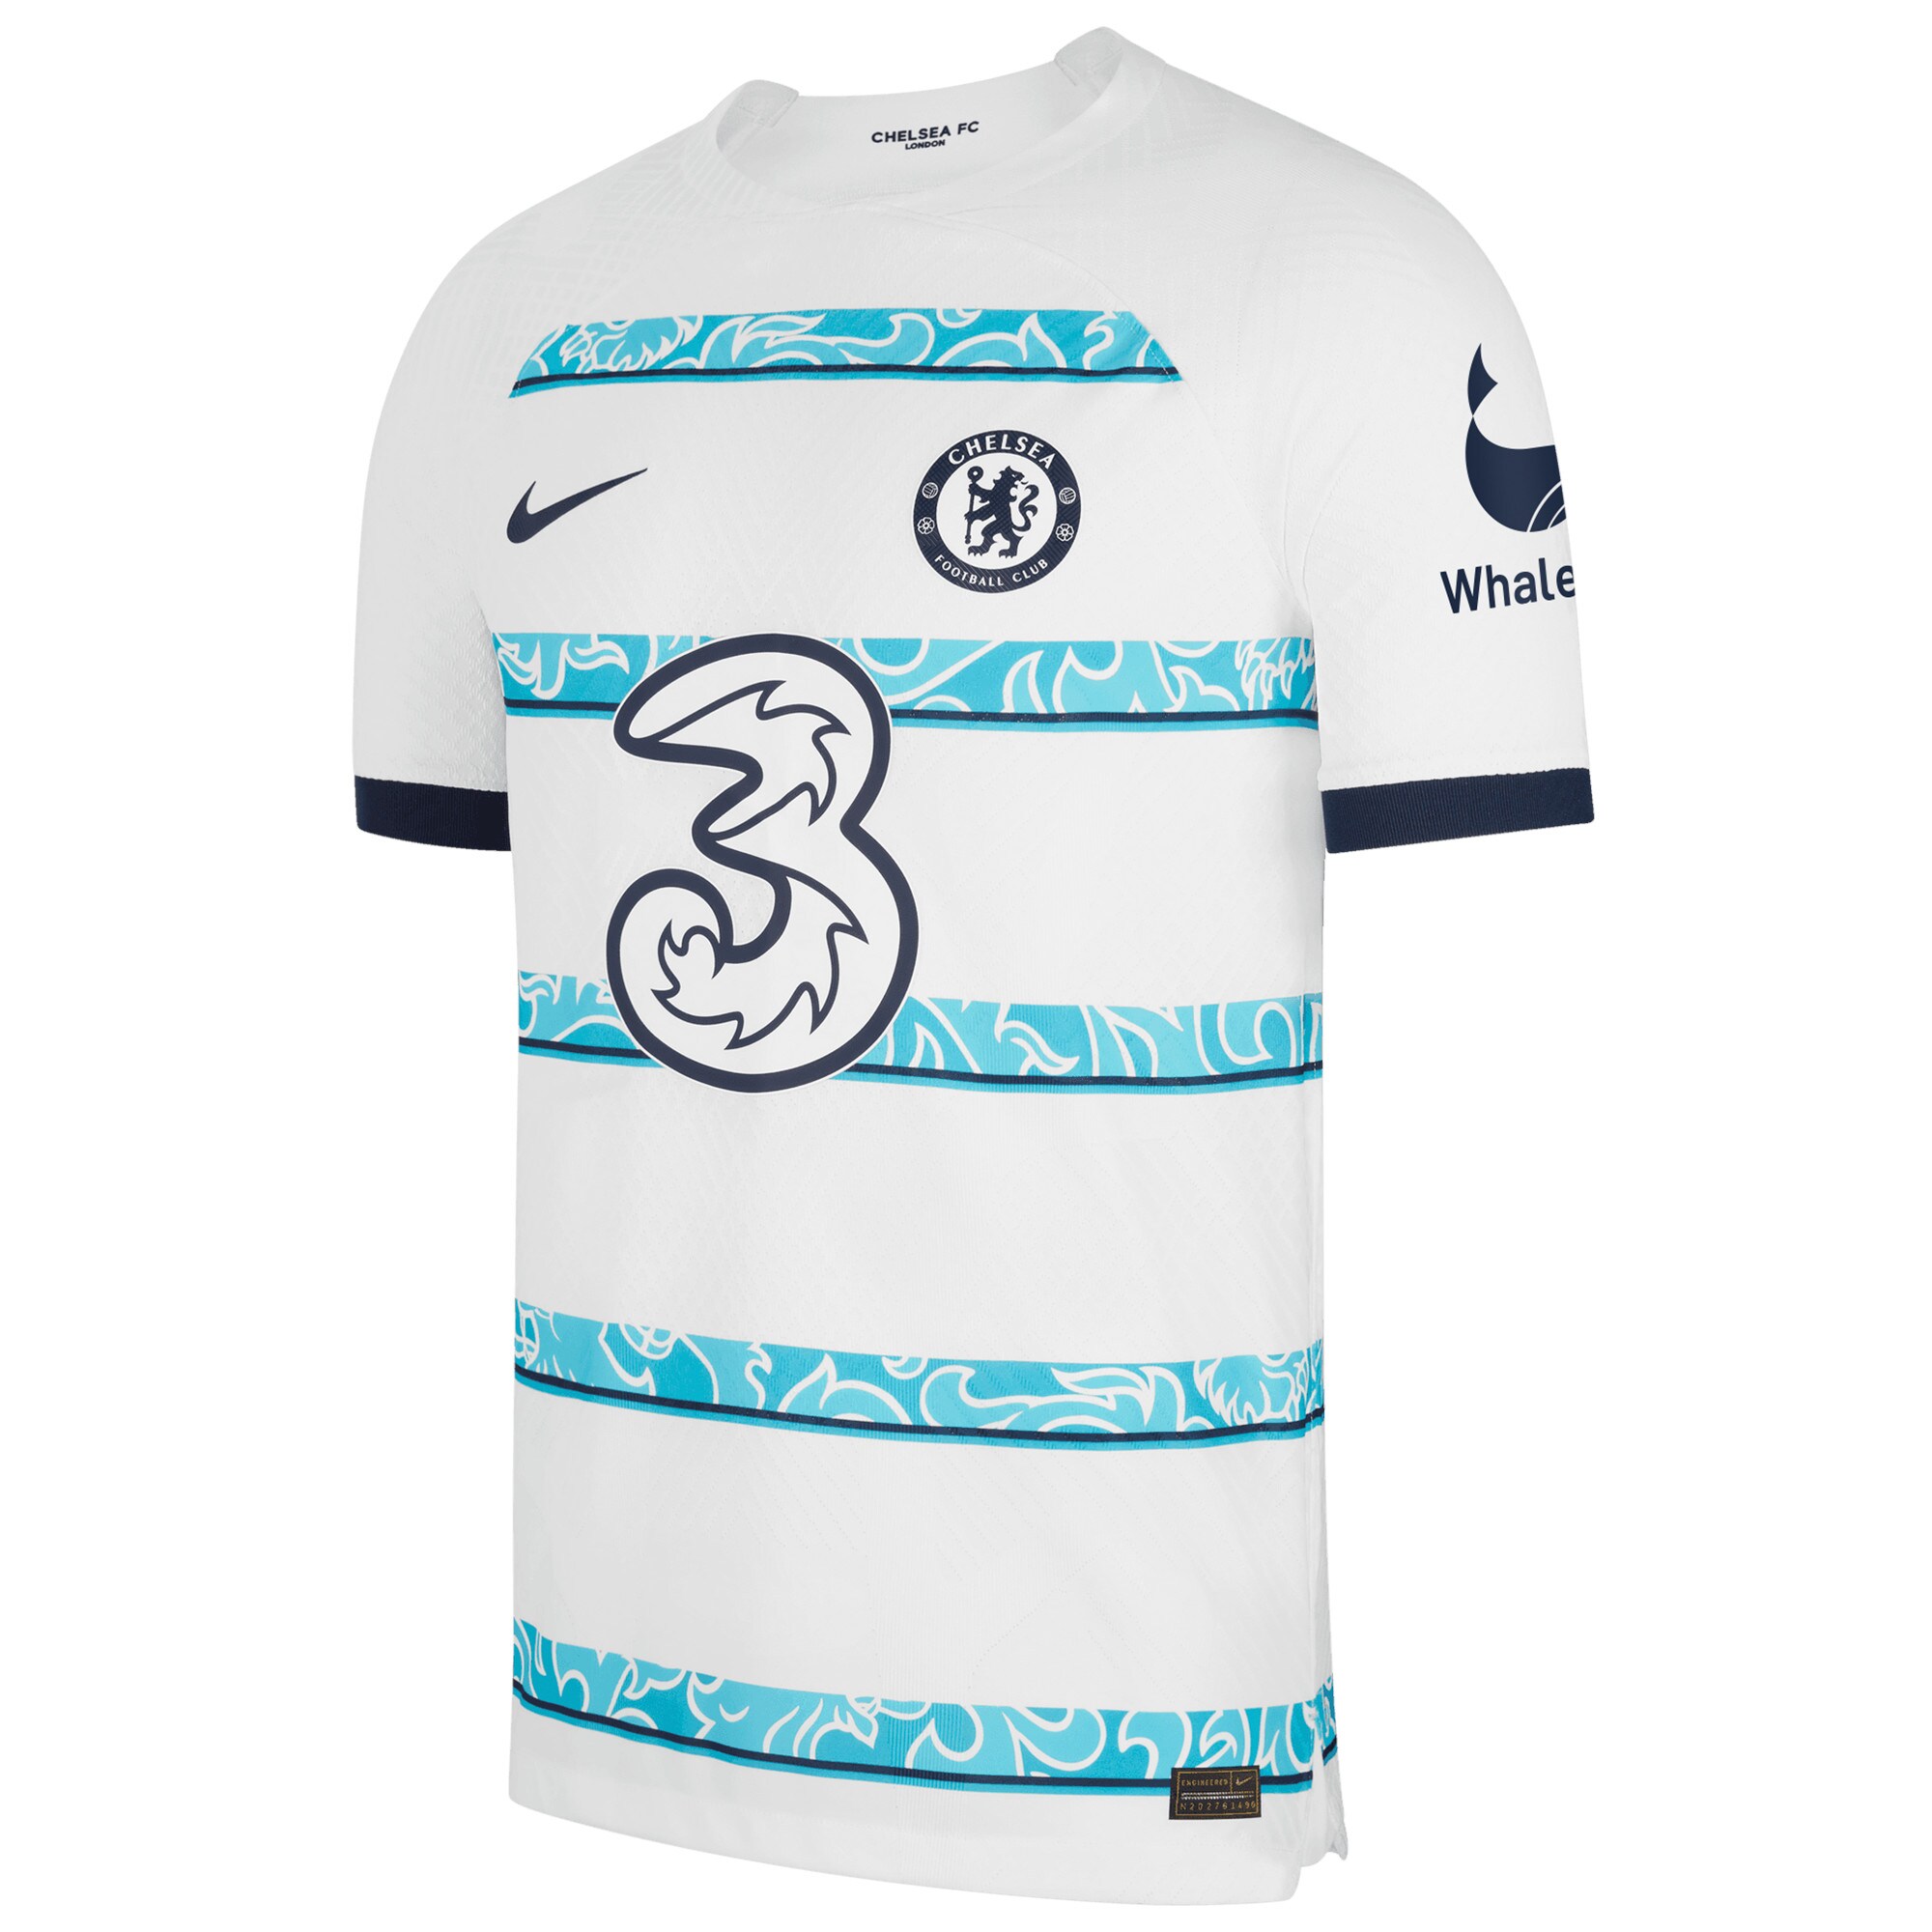 Chelsea Cup Away Vapor Match Shirt 2022-23 with Charles 21 printing